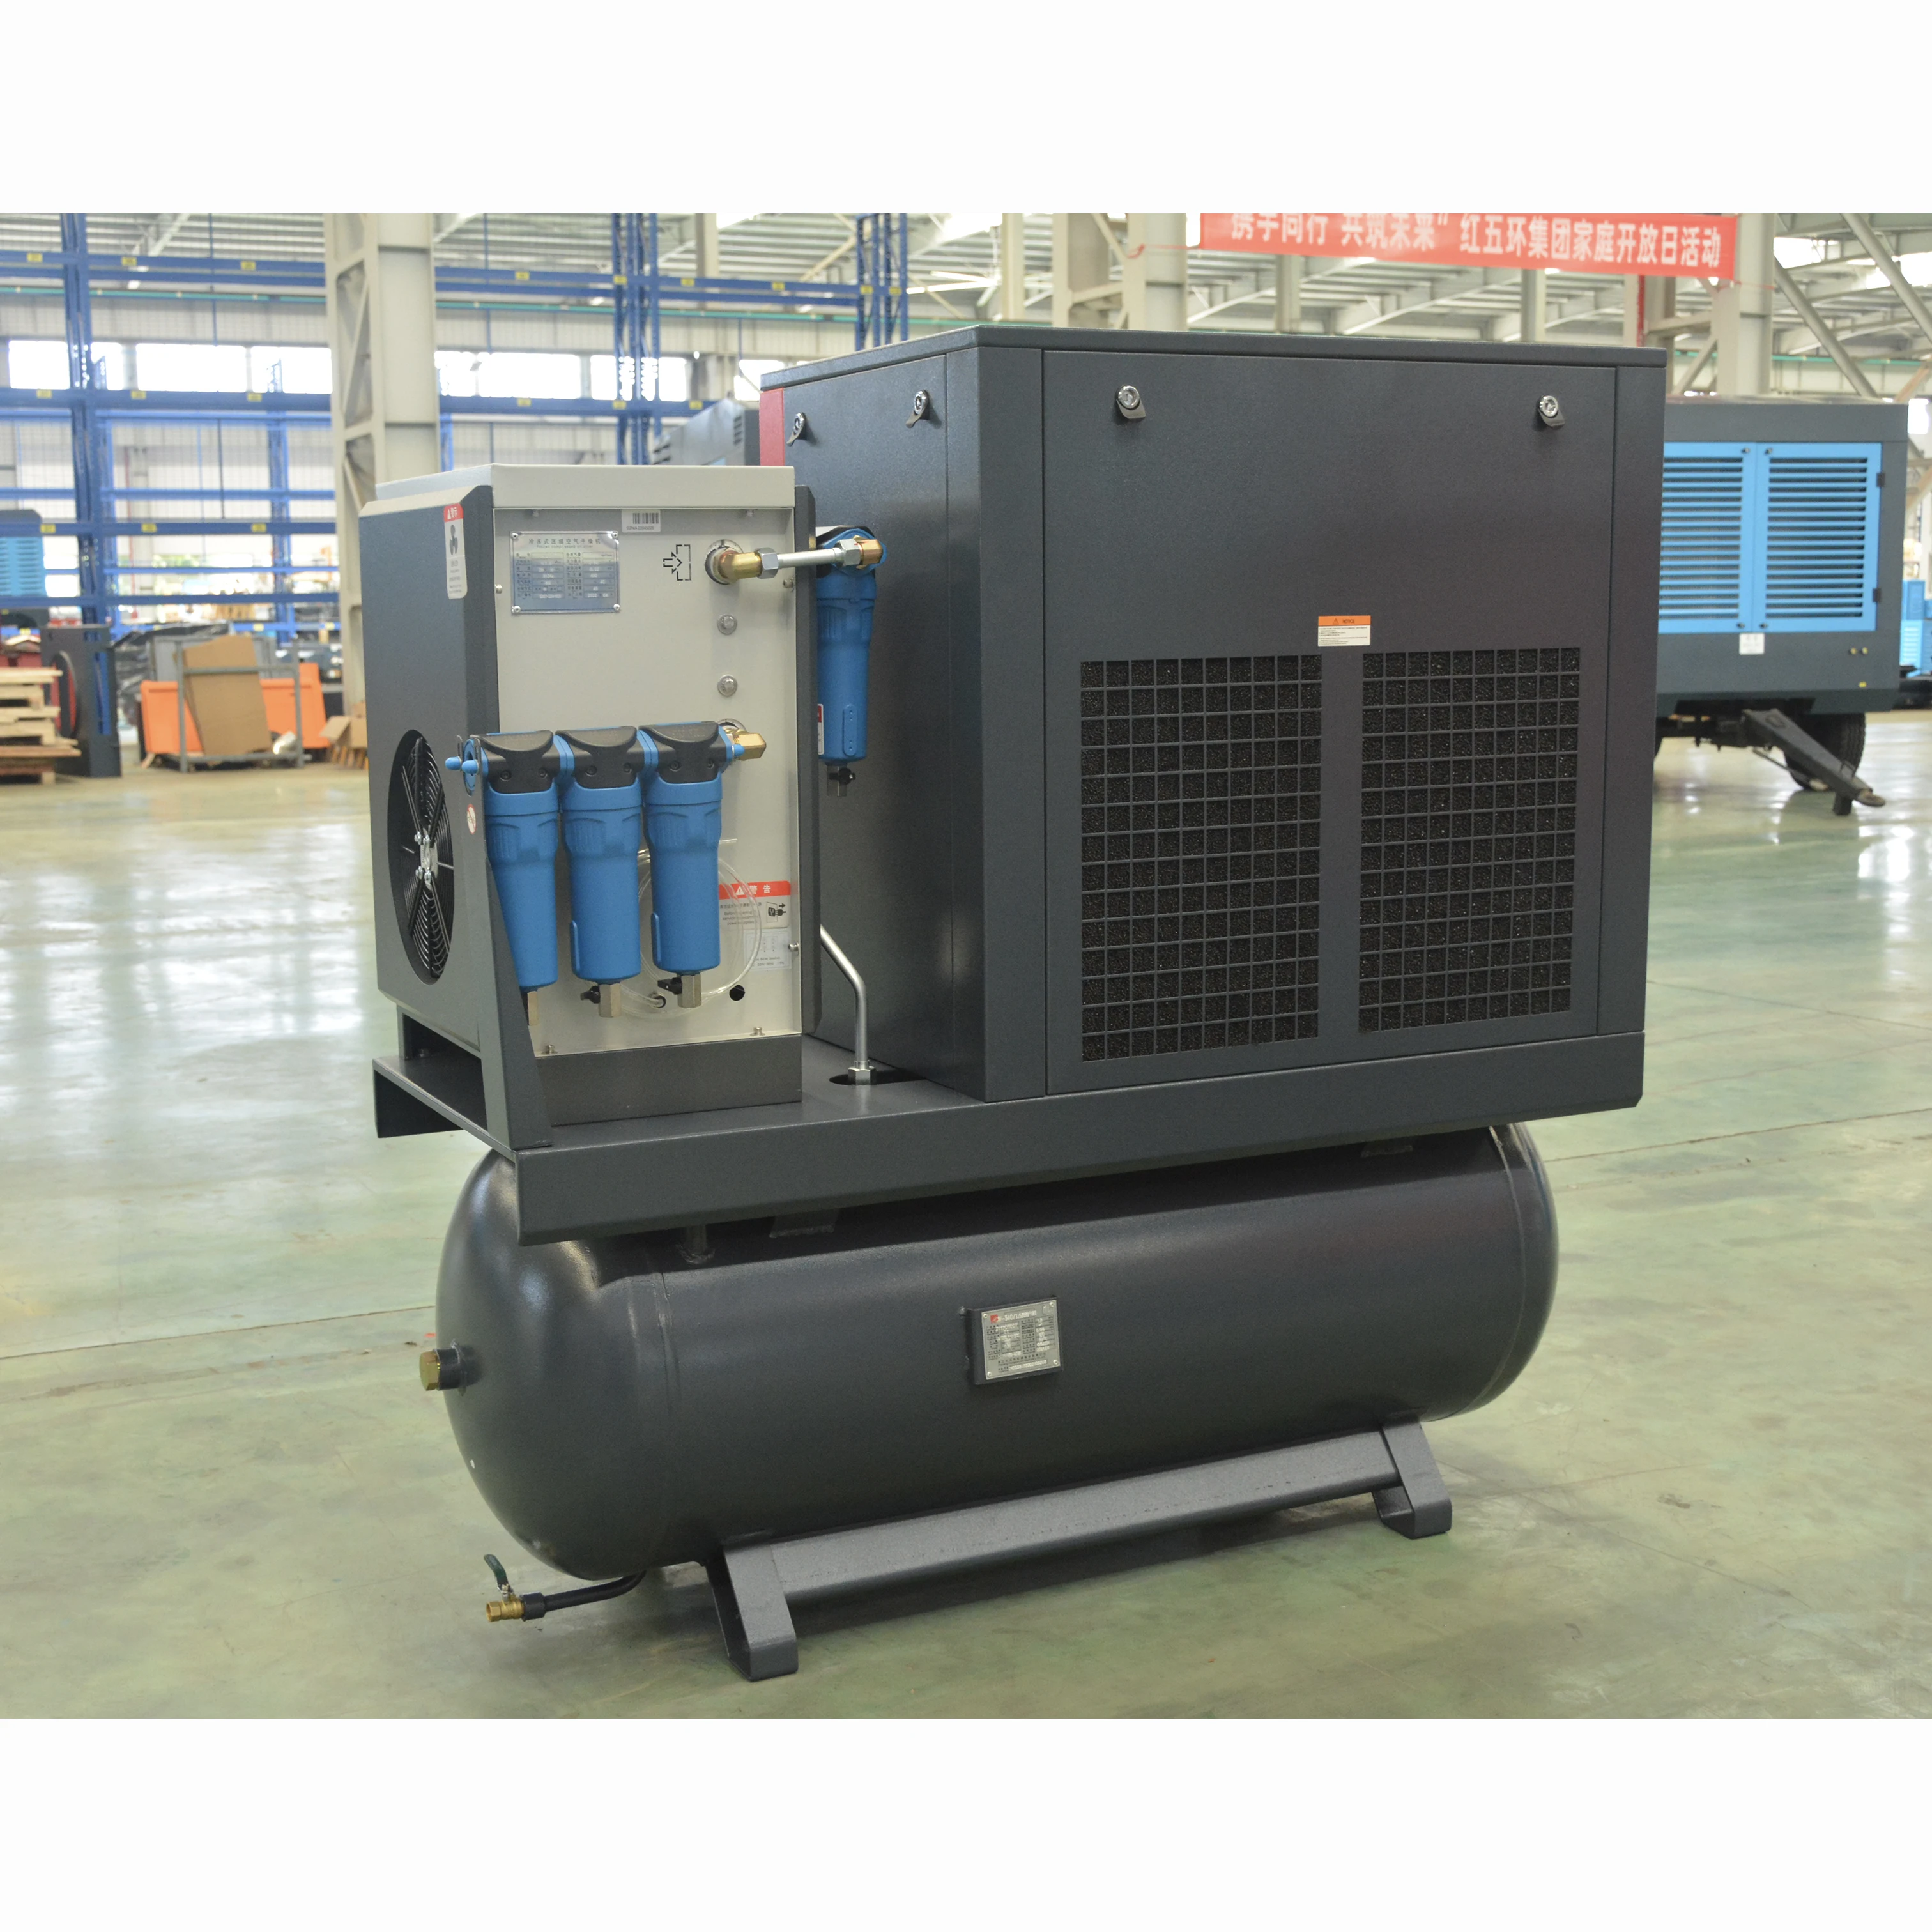 Ai rcompressors Industrial 16 Hp 15 Kw Combined Rotary Screw Air Compressor For Sandblasting Laser Cutting